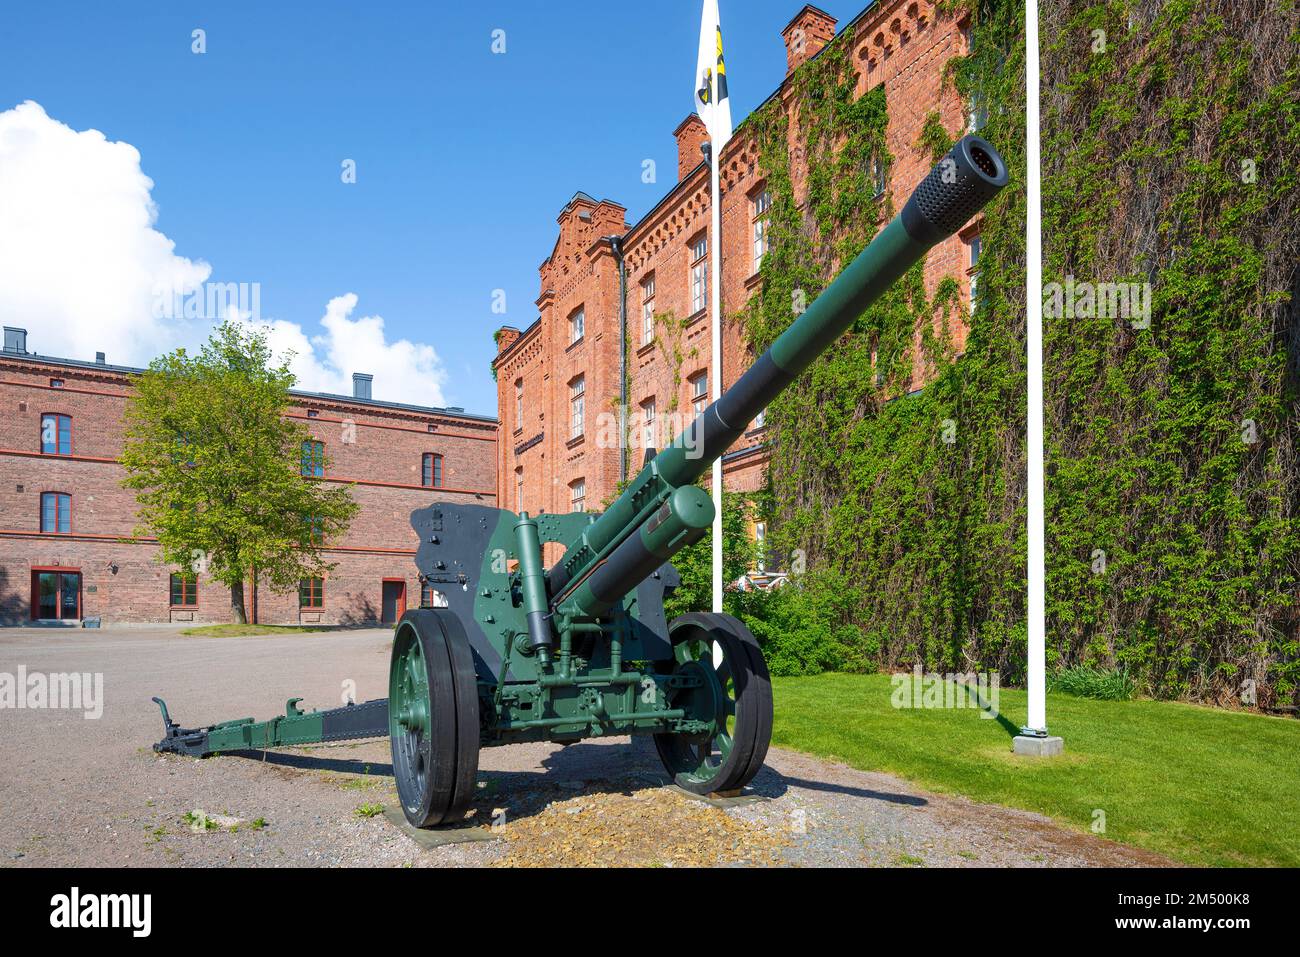 HAMEENLINNA, FINLAND - JUNE 10, 2017: Old cannon from the period of the Second World War at the building of the Museum 'Militaria Museum' Stock Photo